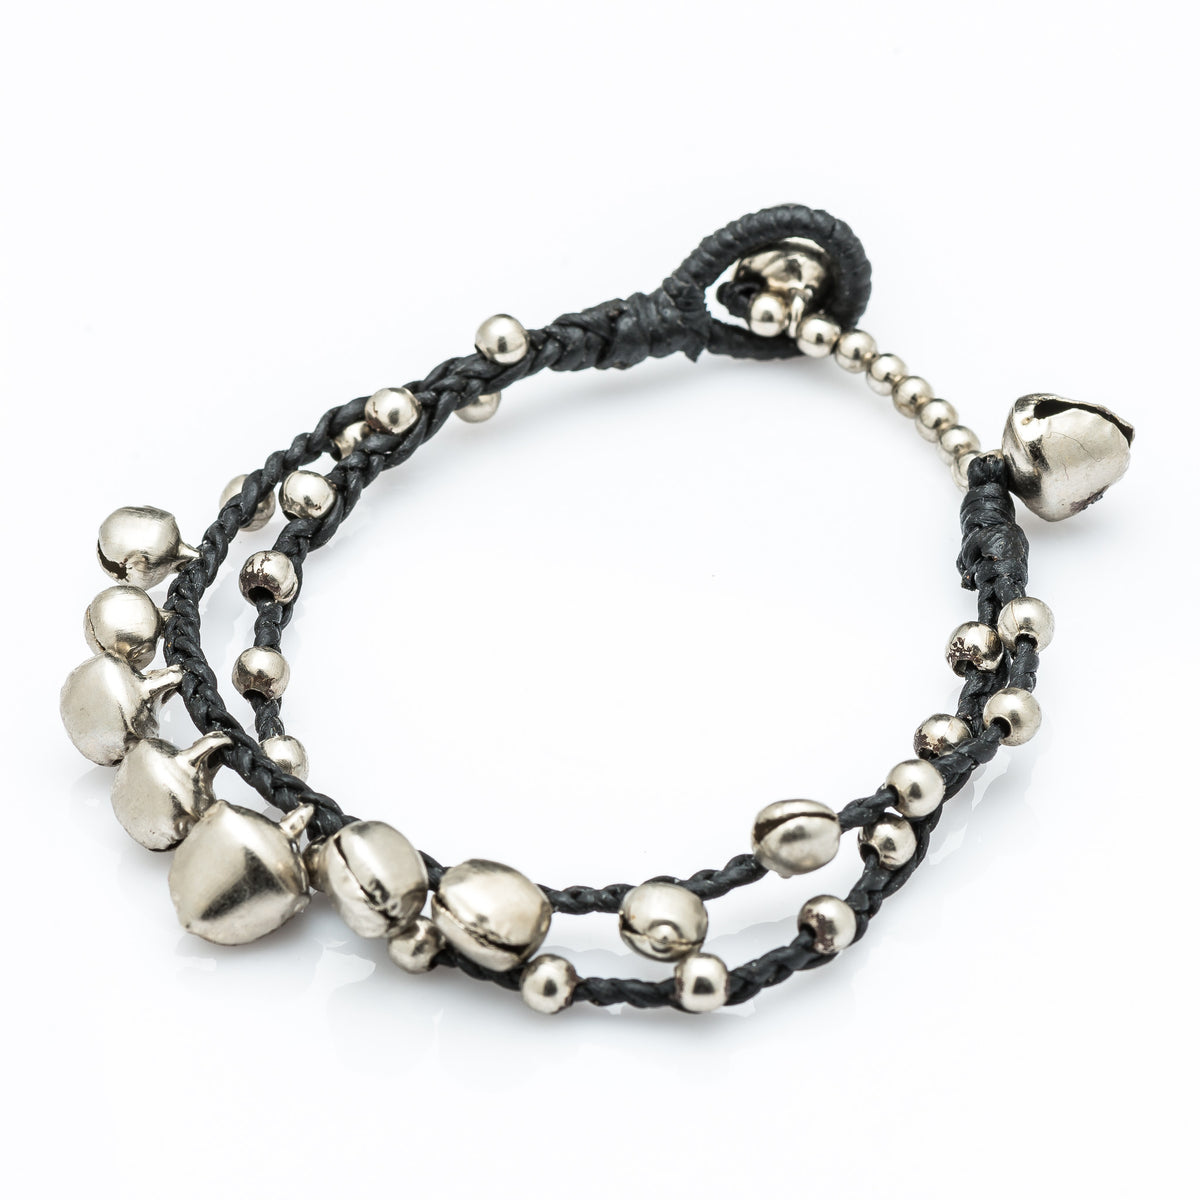 Sure Design Silver Beads Bracelet with Silver Bells in Black